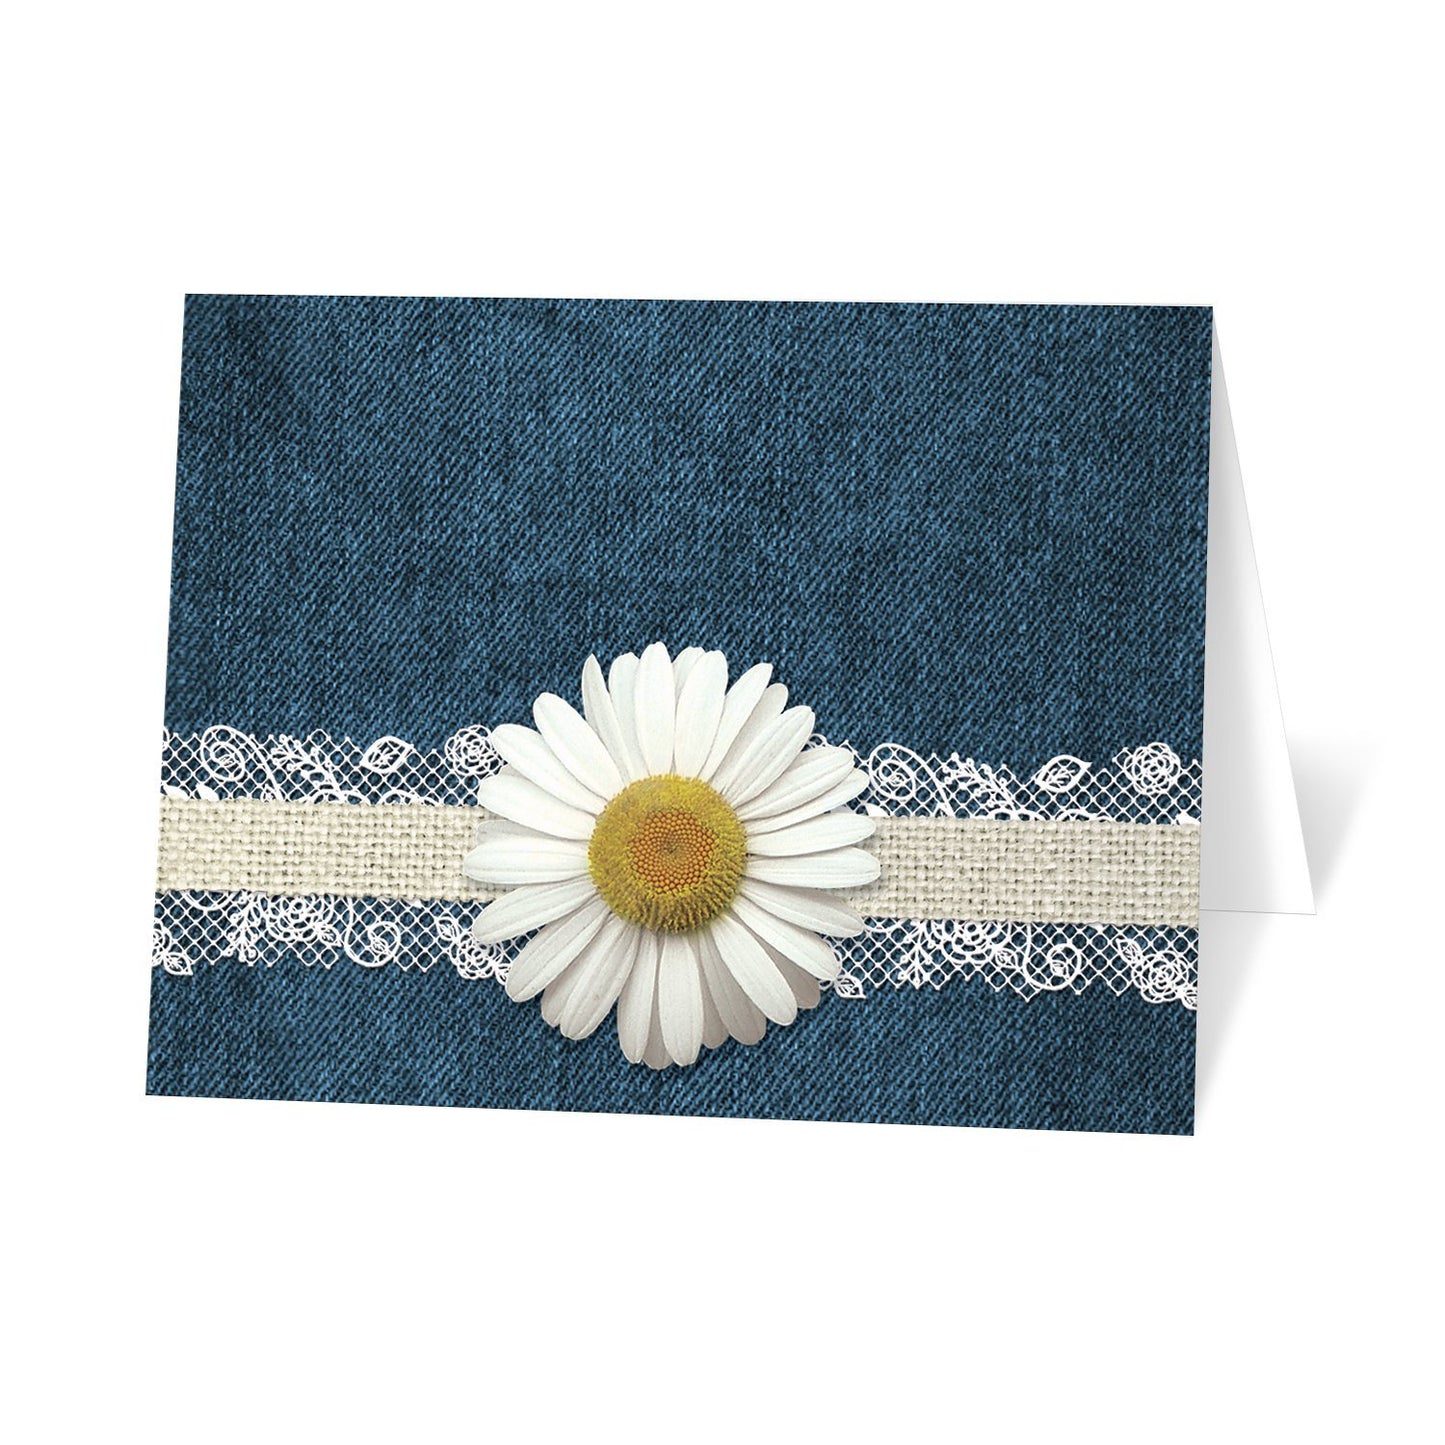 Daisy Burlap and Lace Denim - Daisy Note Cards at Artistically Invited